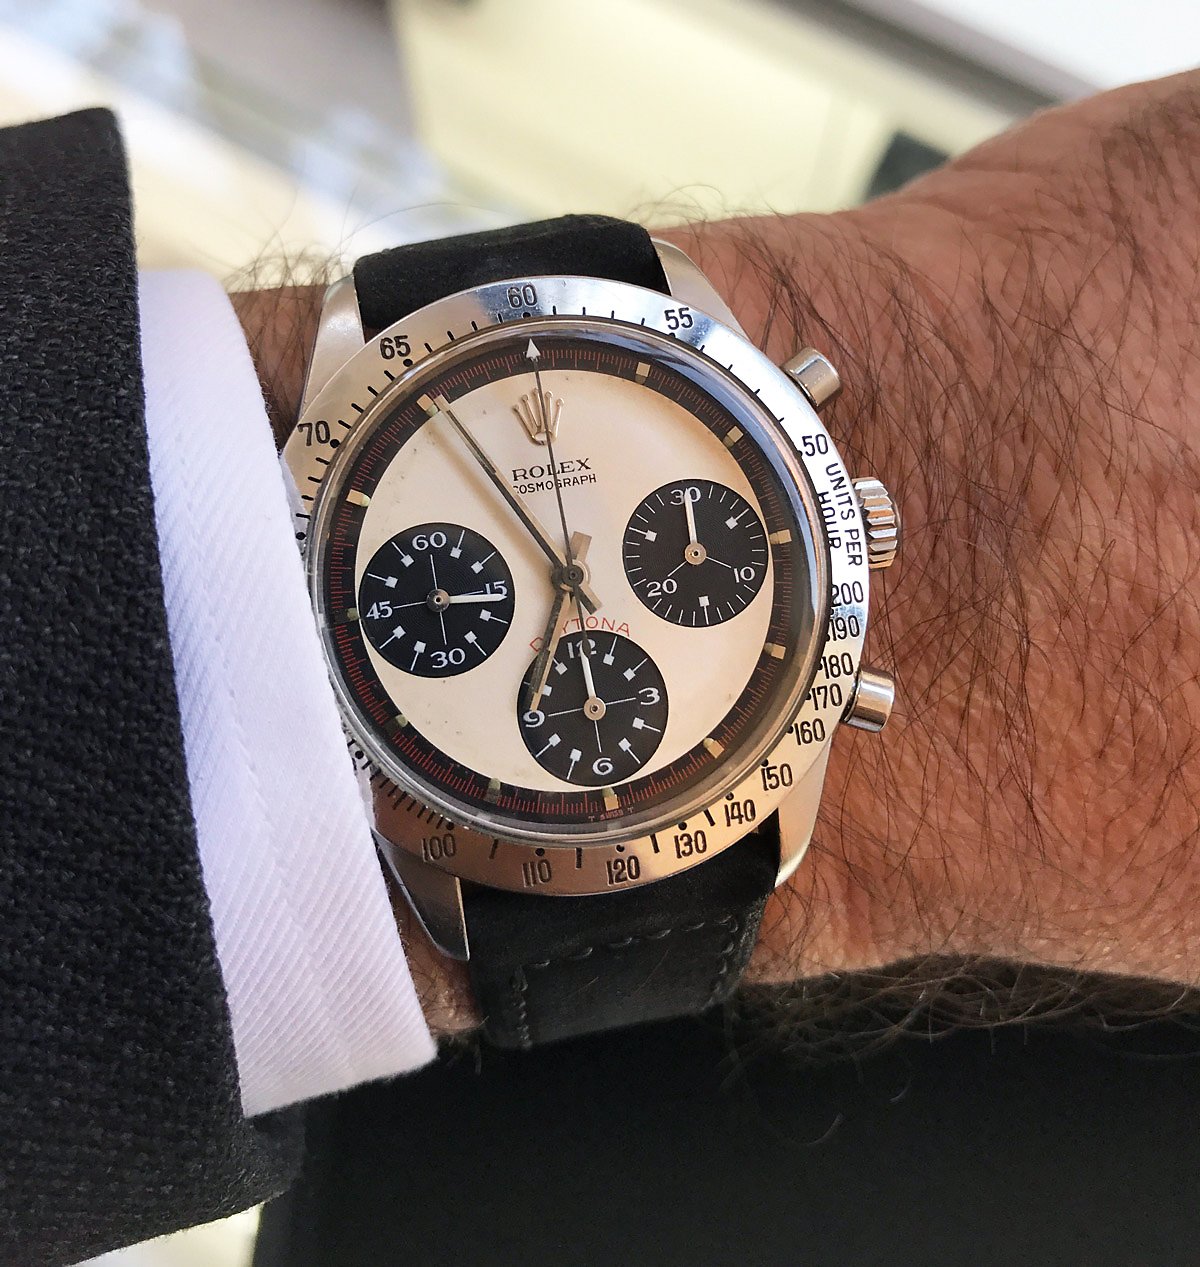 Here is the actual Paul Newman Daytona that Paul Newman wore.